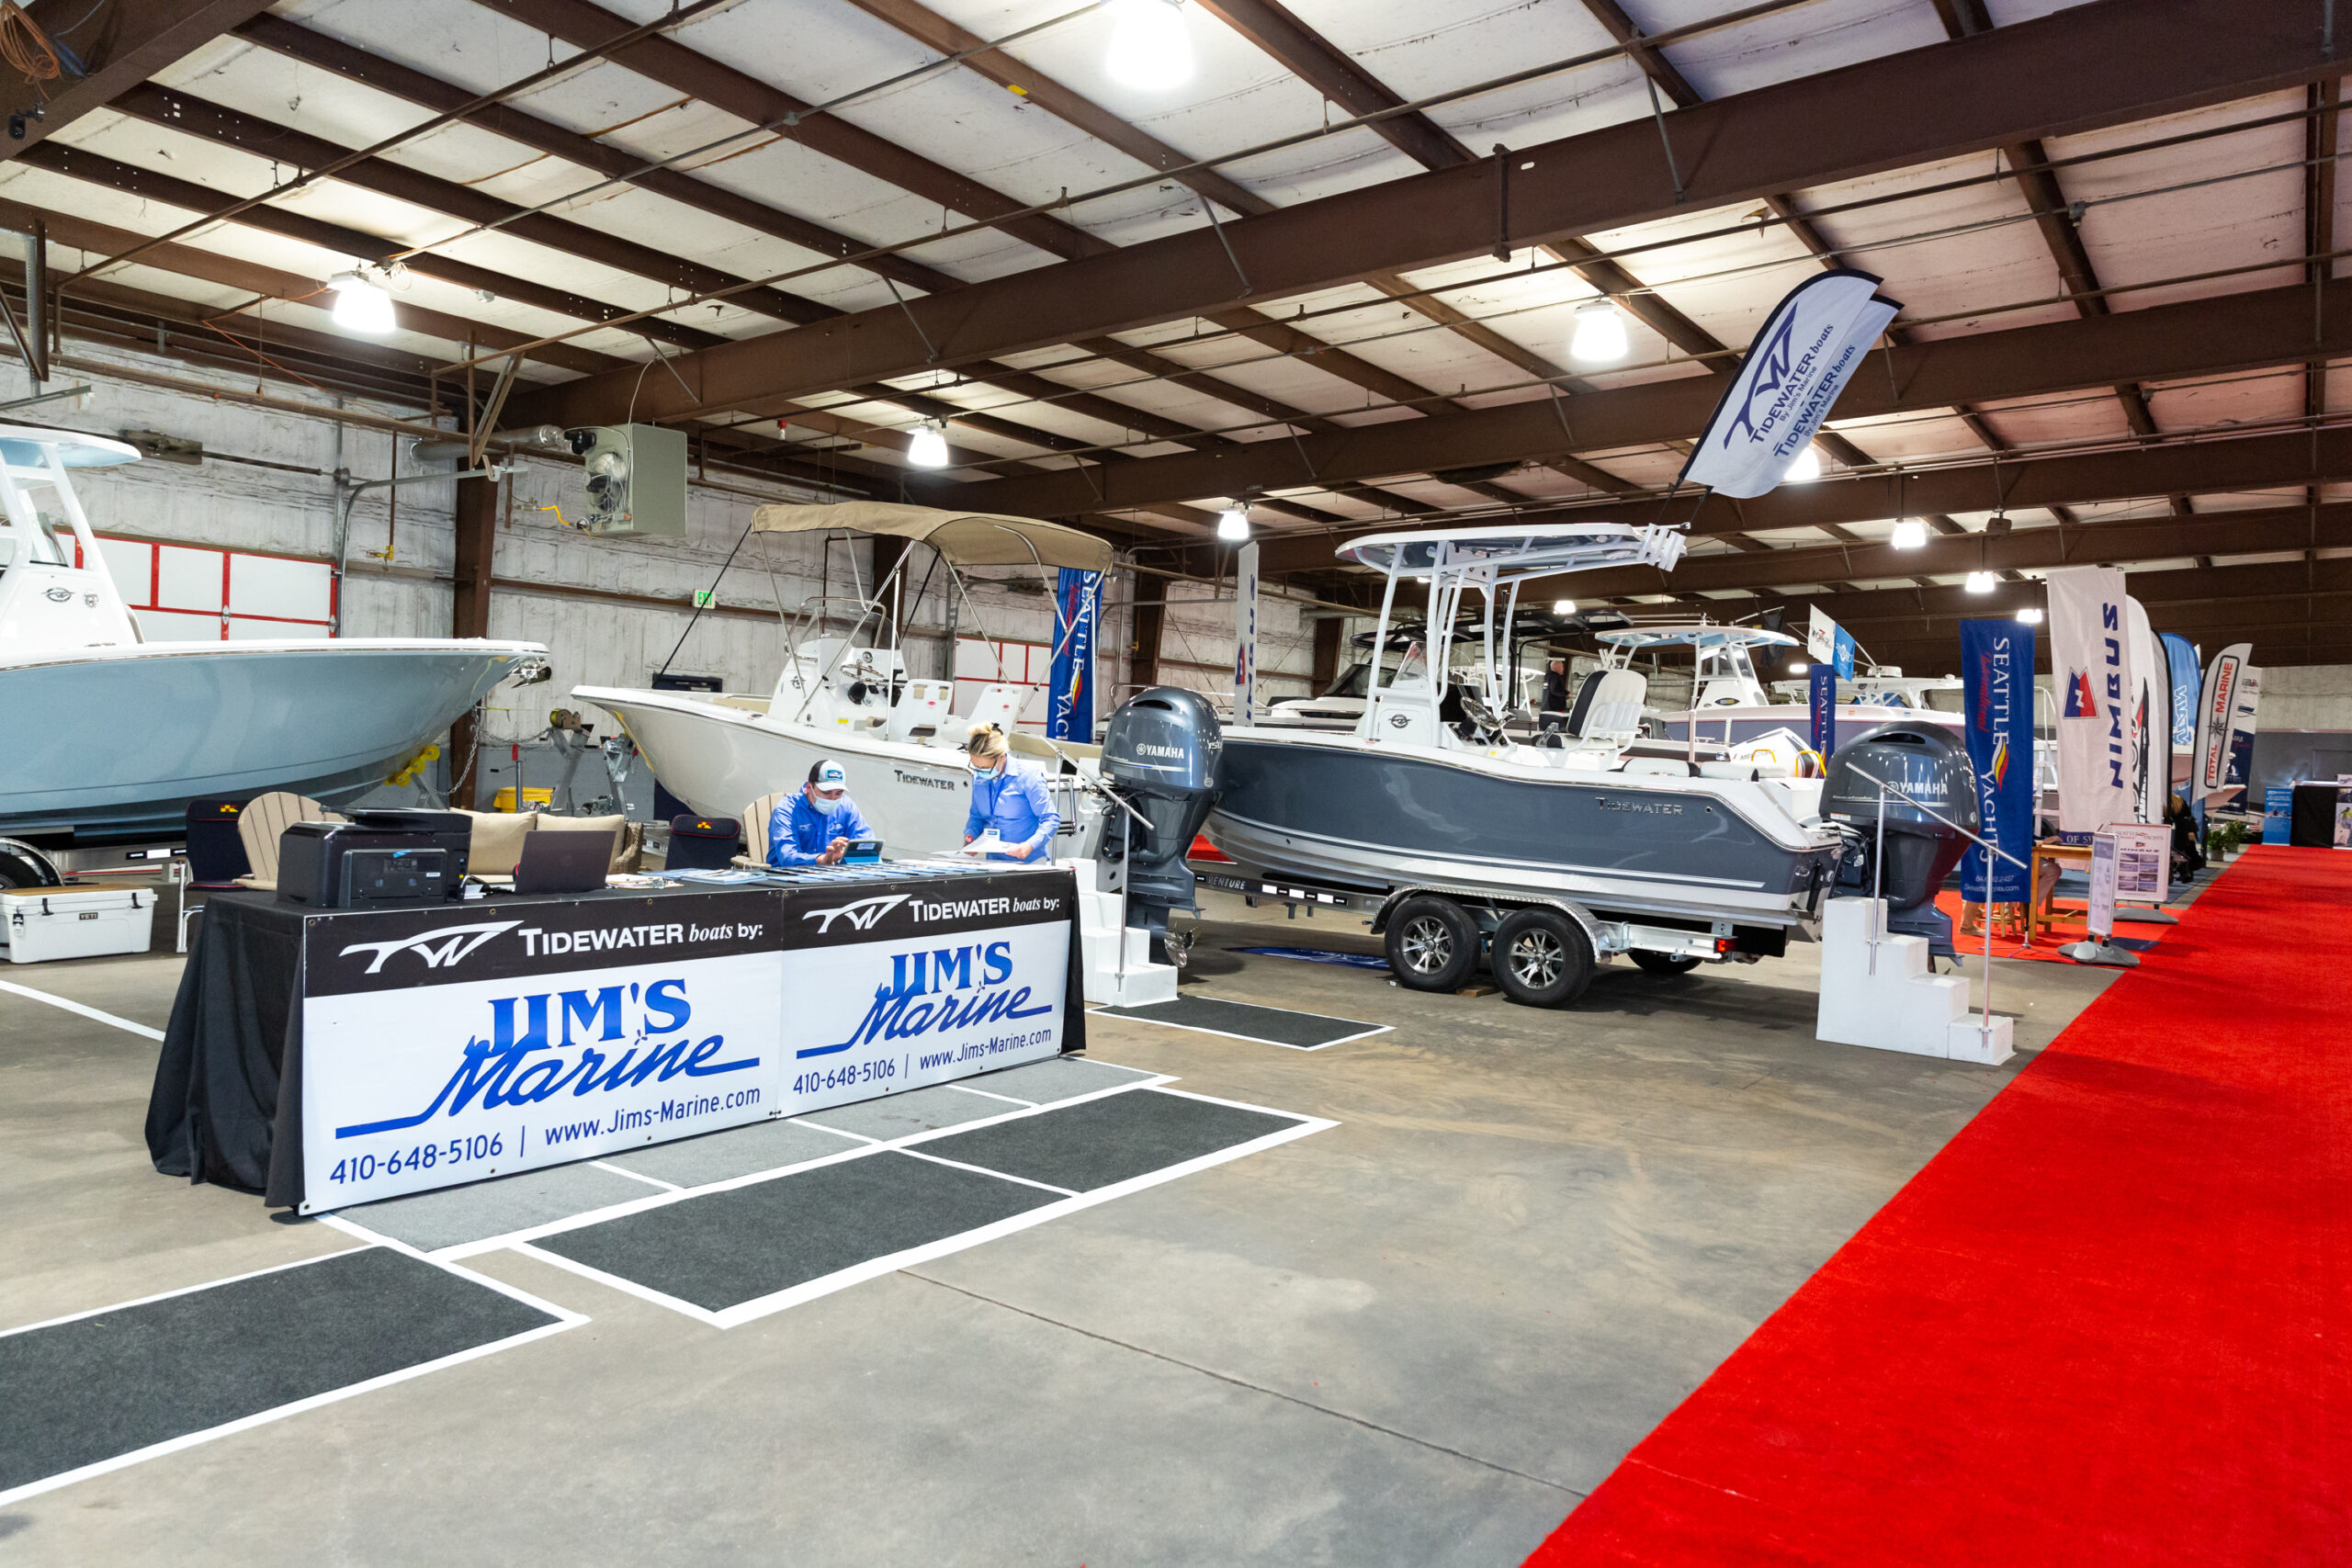 Why Attend? The Chesapeake Bay Boat Show